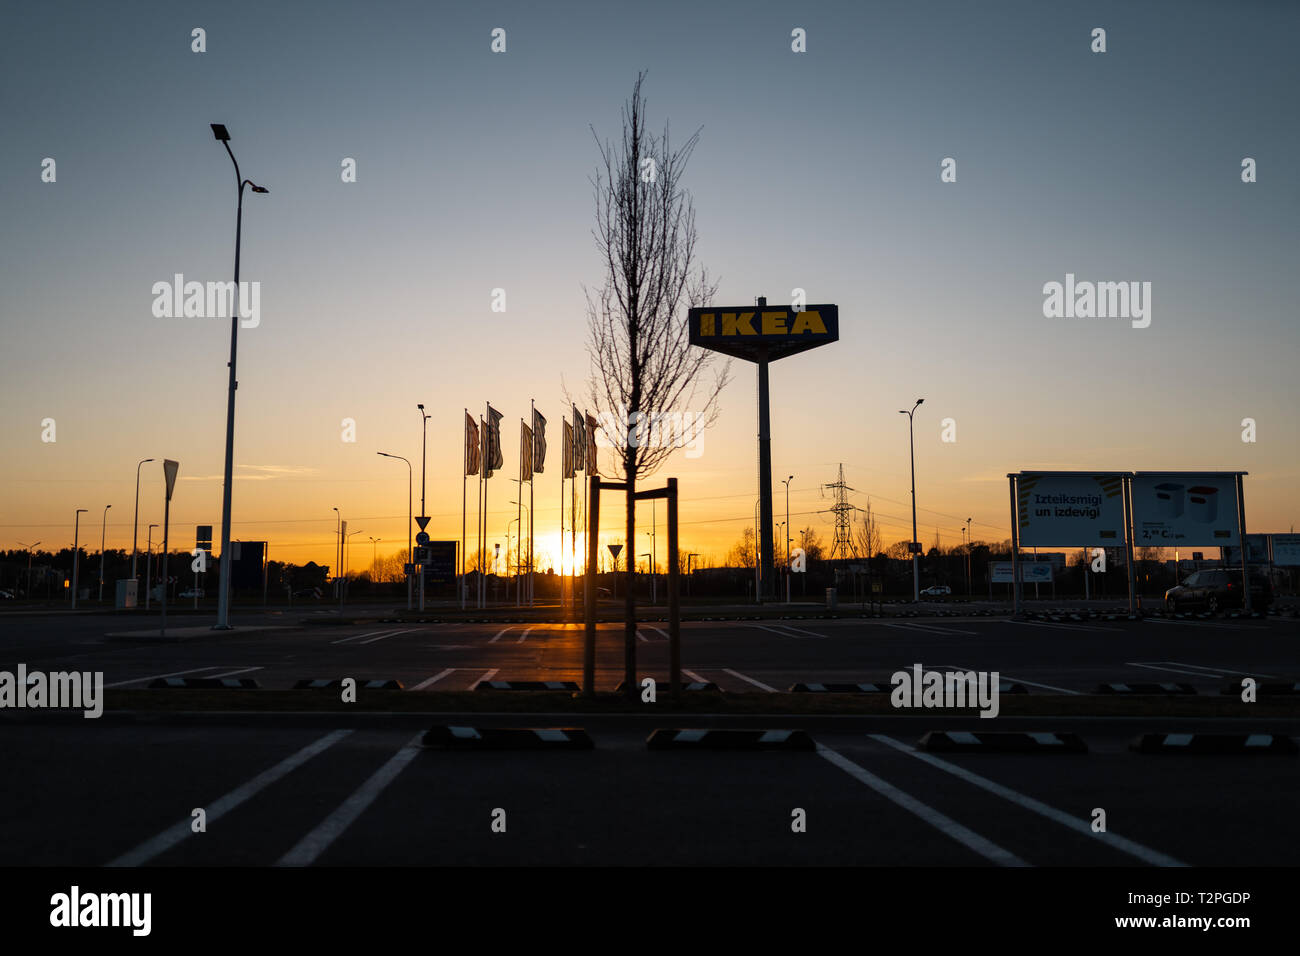 RIGA, LATVIA - APRIL 3, 2019: IKEA brand sign during dark evening and wind - Blue sky in the background - Popular shopping centre Stock Photo